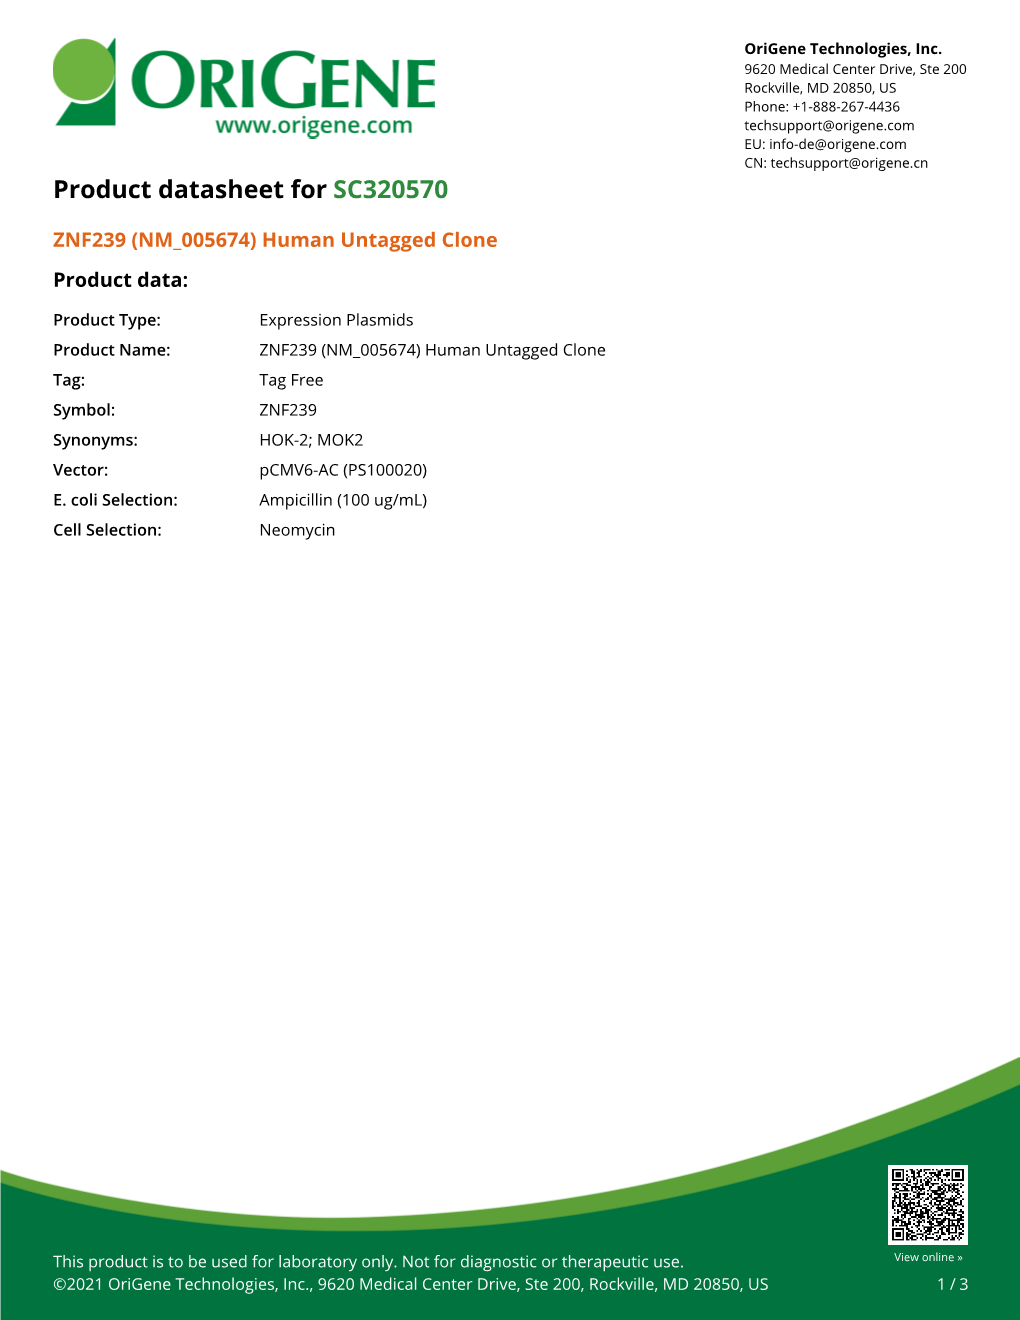 ZNF239 (NM 005674) Human Untagged Clone Product Data